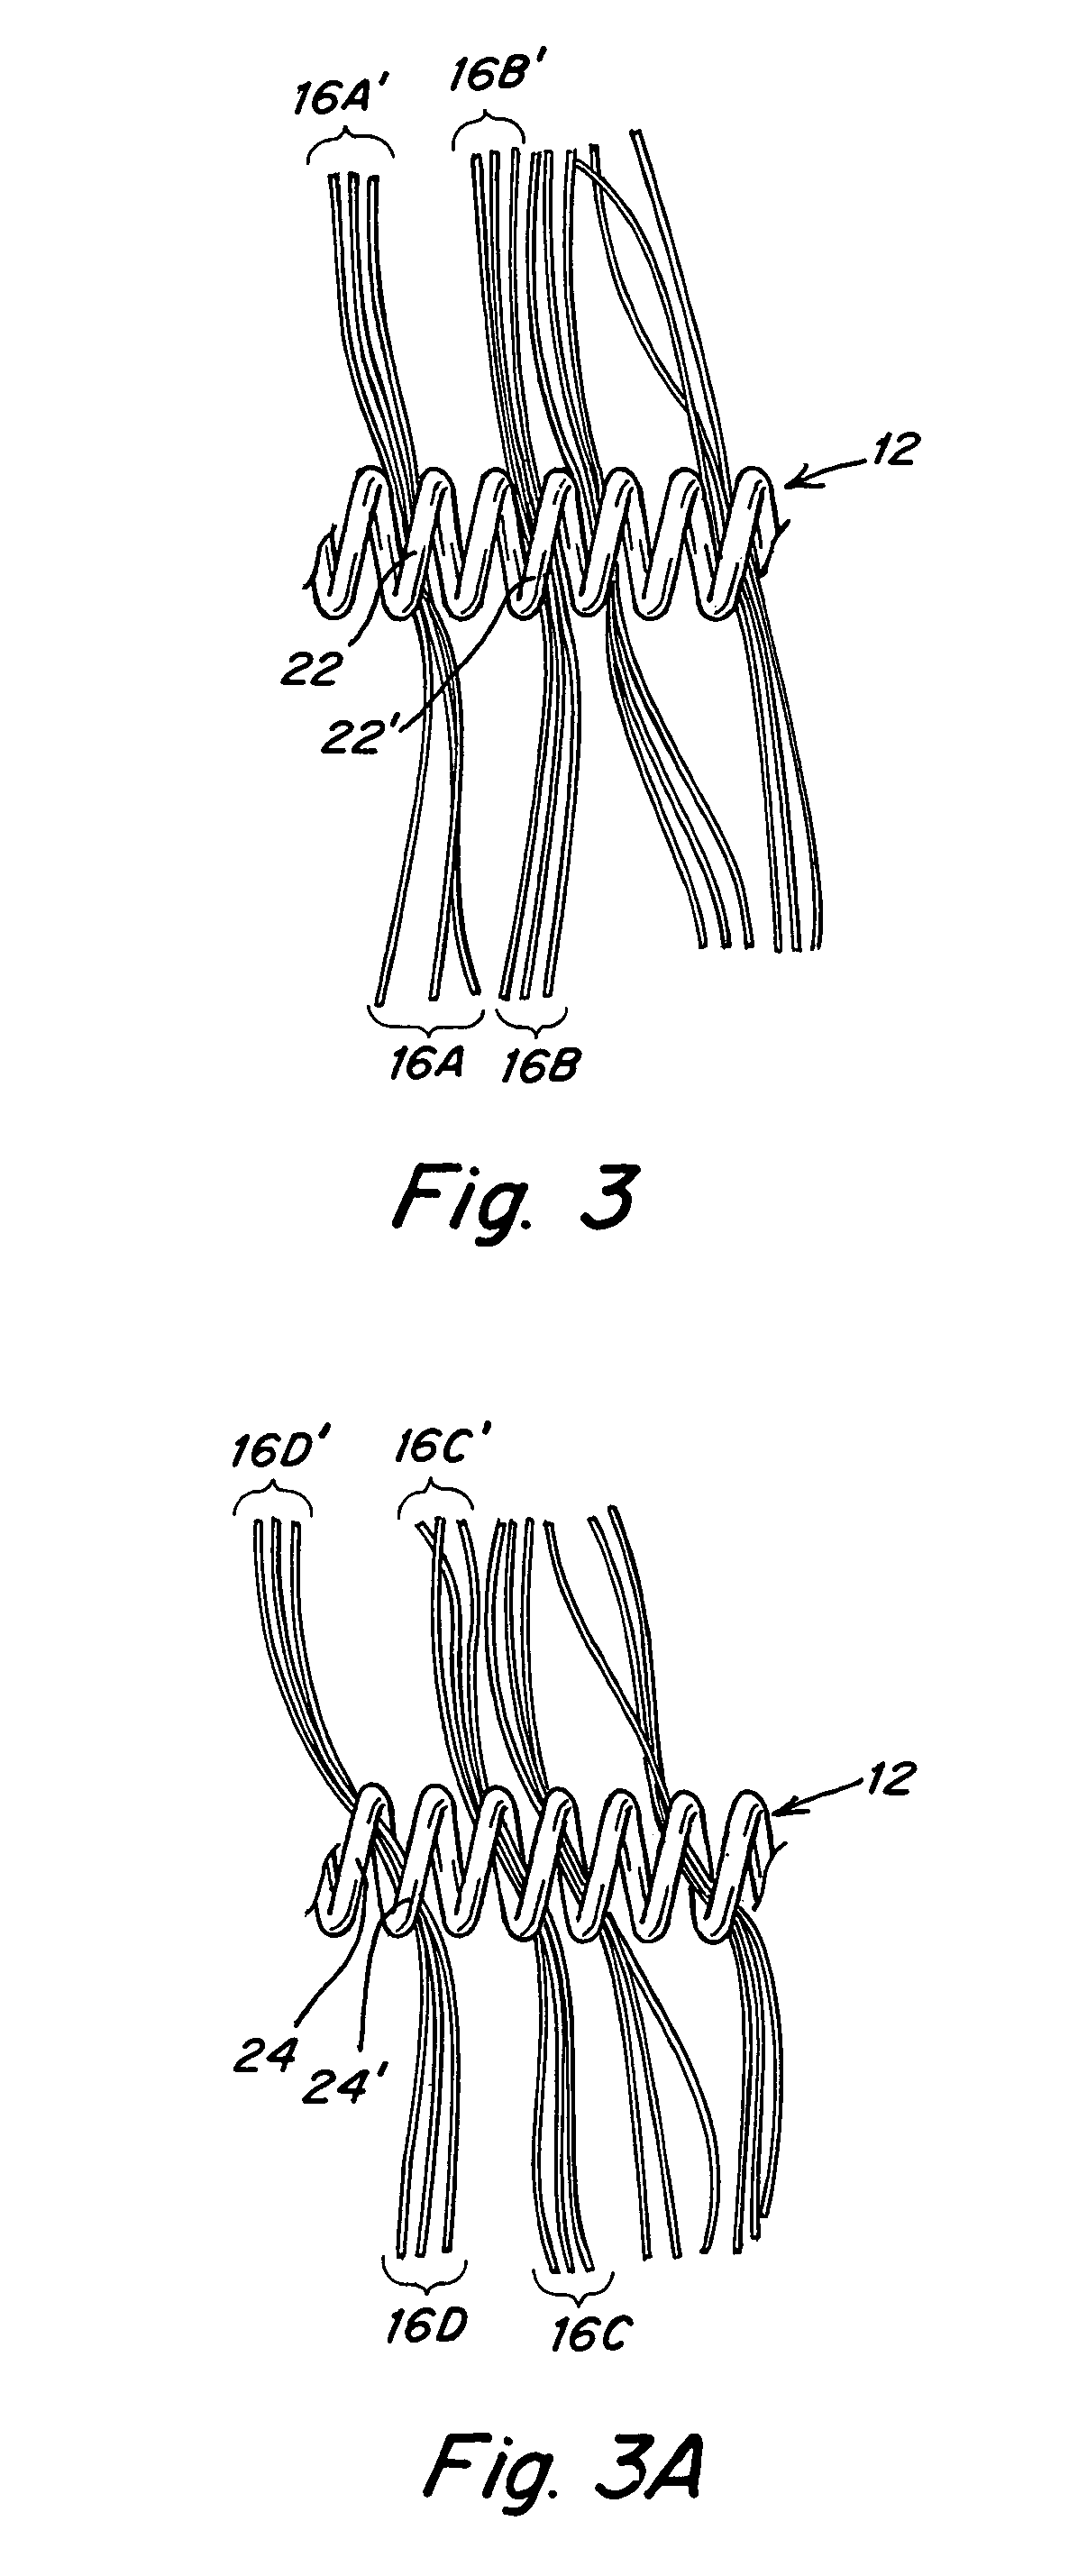 Metallic coils enlaced with biological or biodegradable or synthetic polymers or fibers for embolization of a body cavity